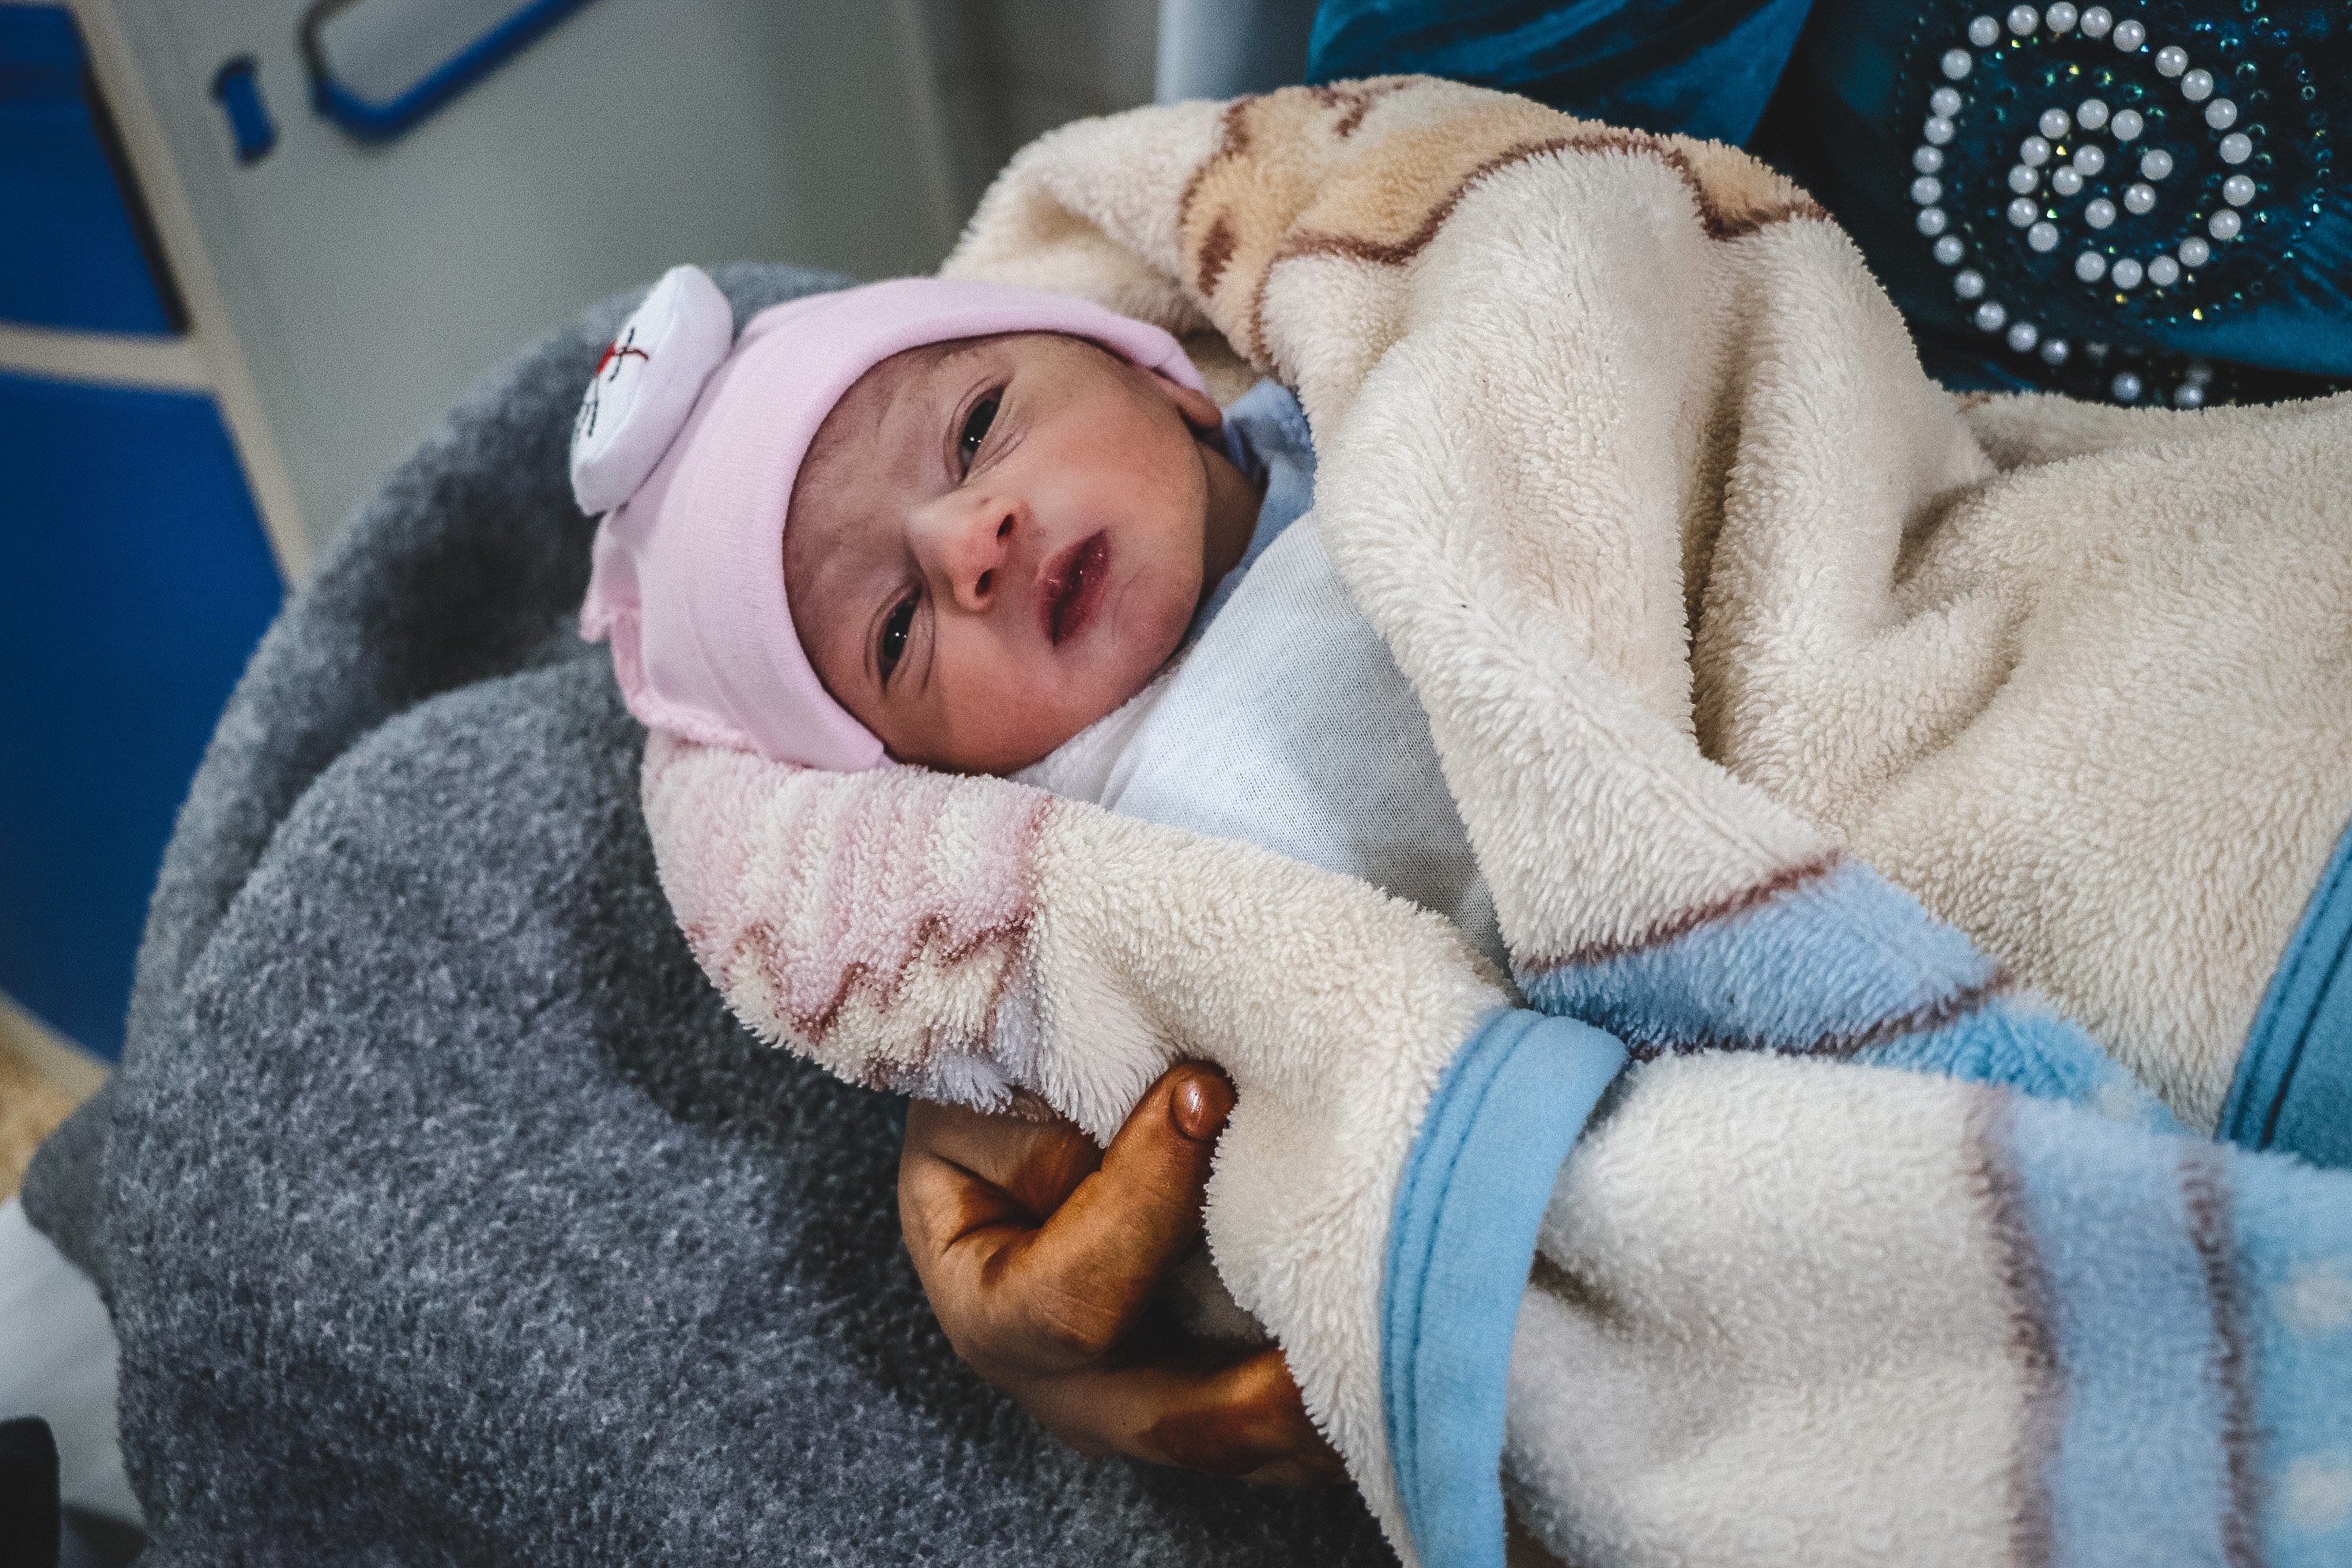 Baby Layth was born on January 12th in the morning. He is the first son of Rafida, 15 years old. Layth’s mother had to go through a vacuum delivery, because of fetal distress and tachycardia.